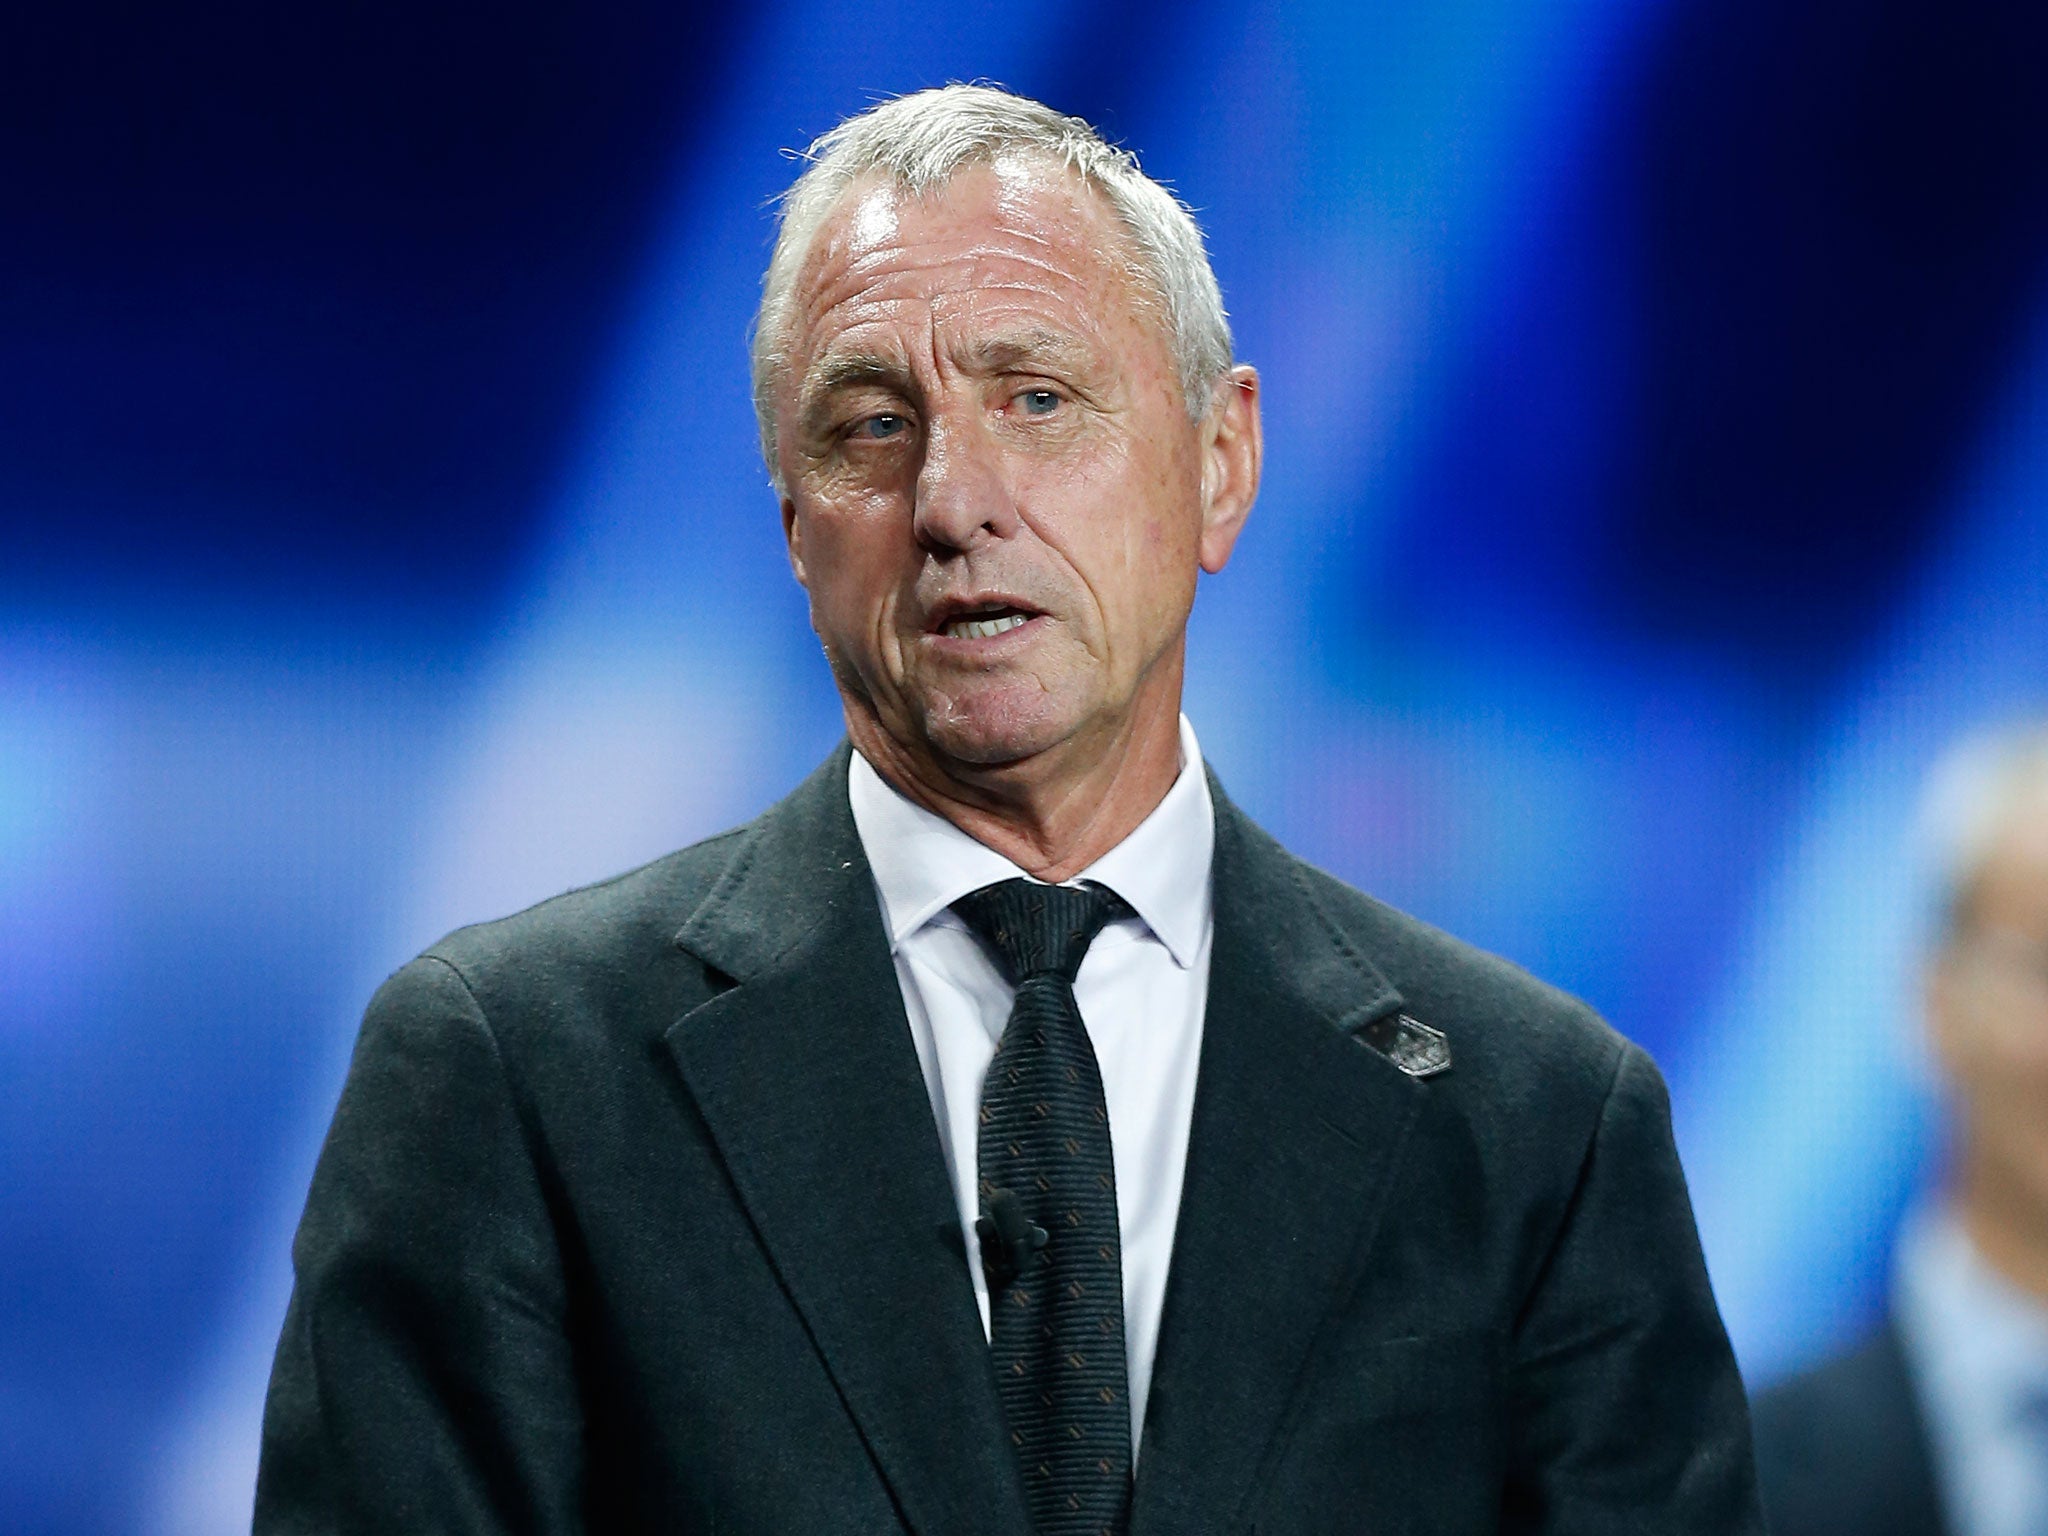 A Dutch newspaper has apologised to Johan Cruyff after bogus report that claimed he was dead went viral